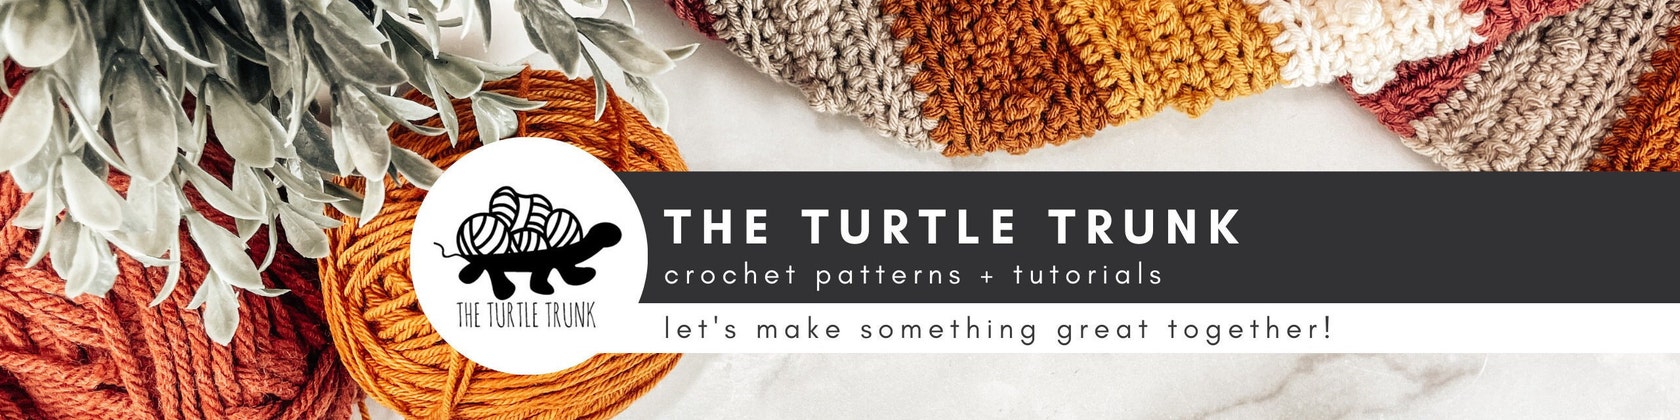 Gift Topper & Ornament Crochet Patterns - The Turtle Trunk